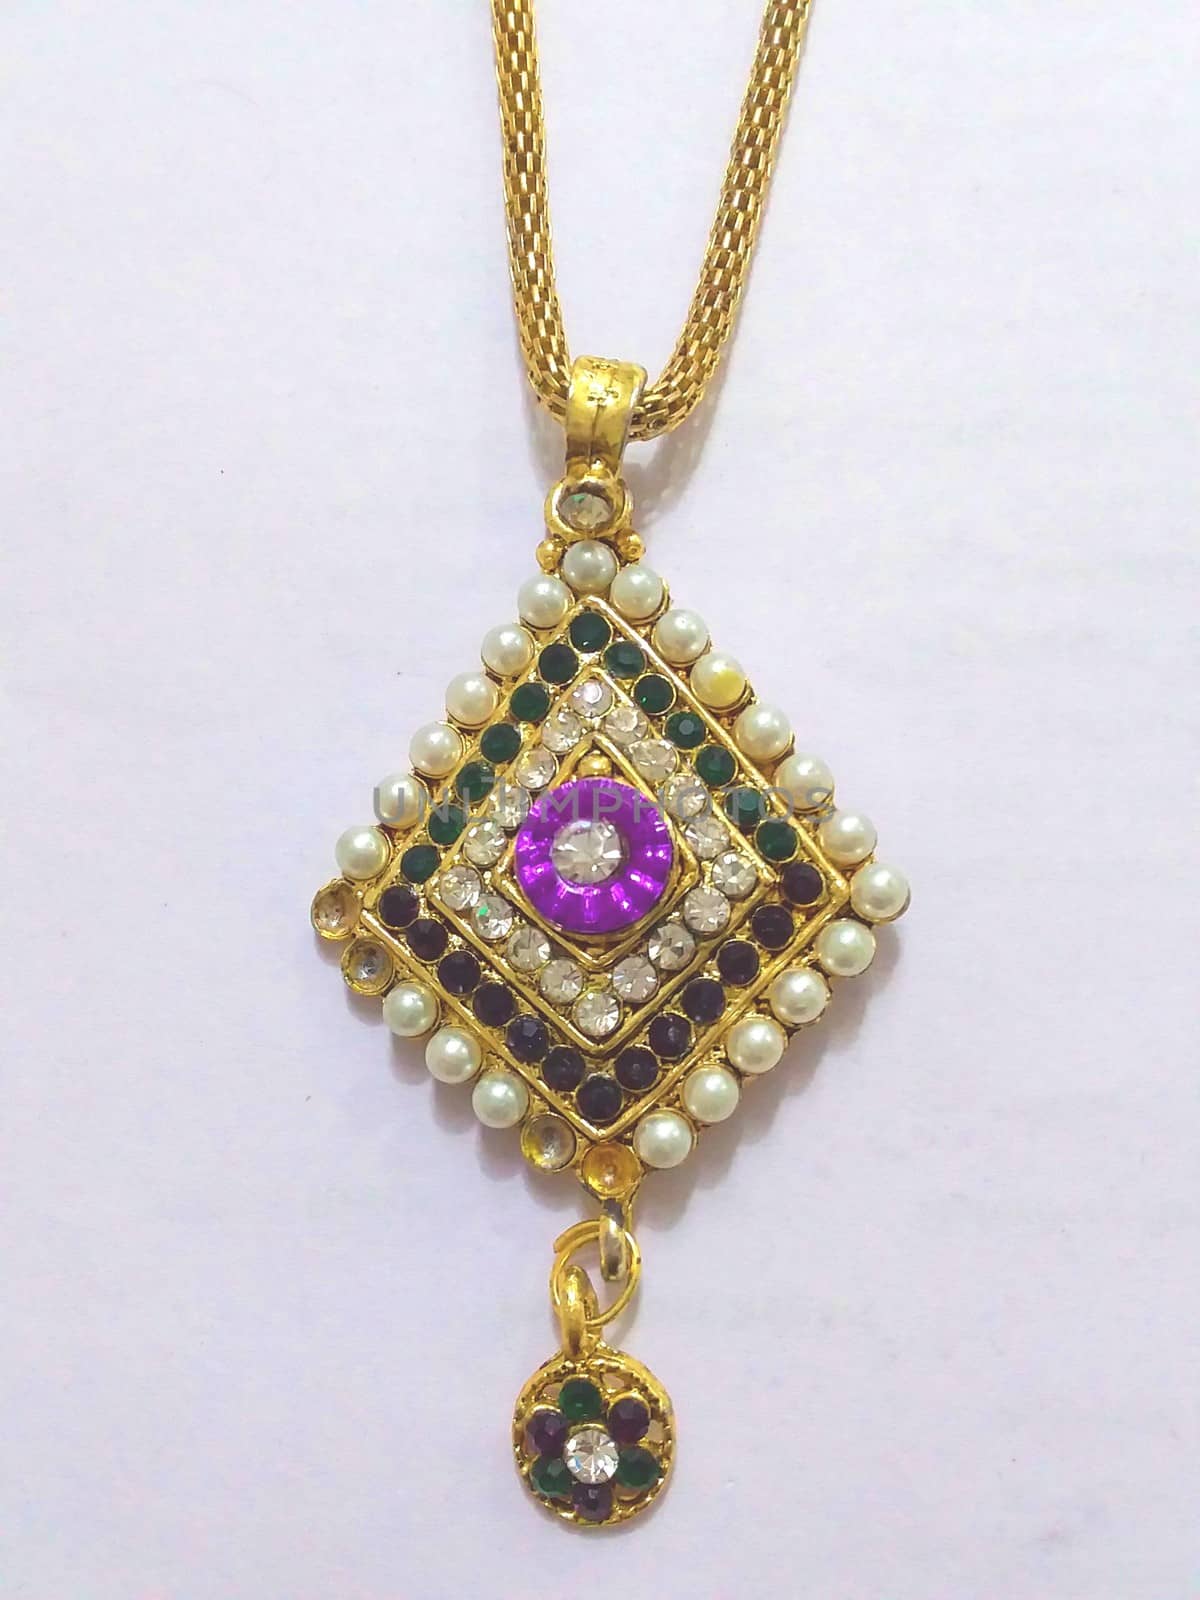 a pendant in the necklace